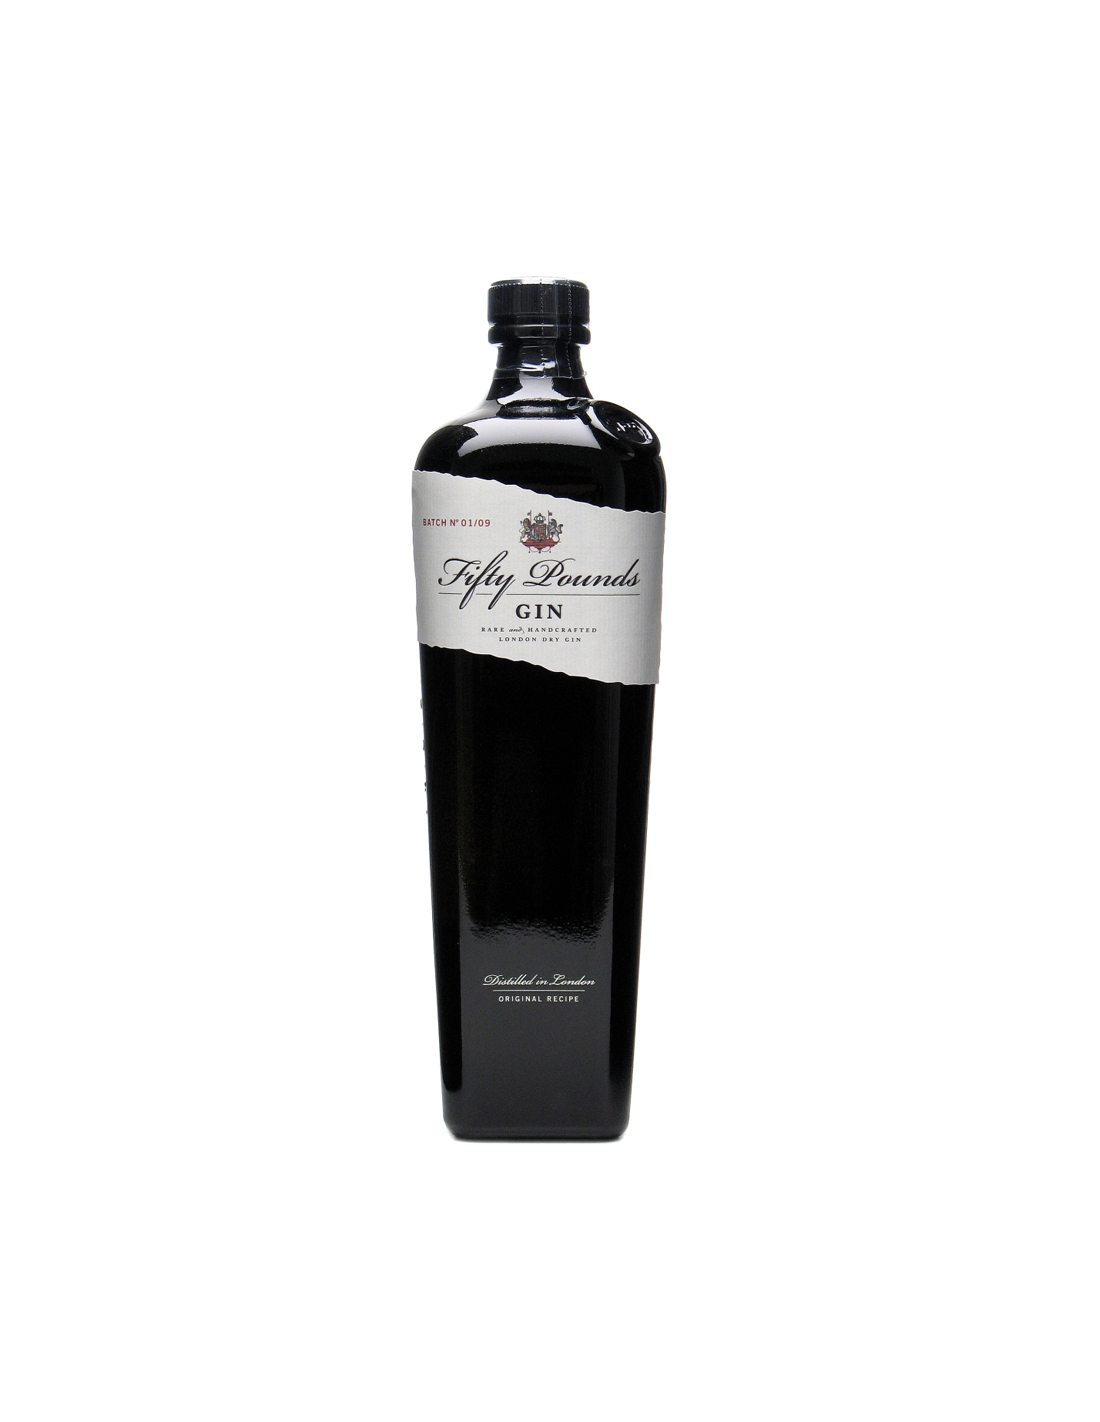 Gin Fifty Pounds 43.5% alc., 0.7L alcooldiscount.ro